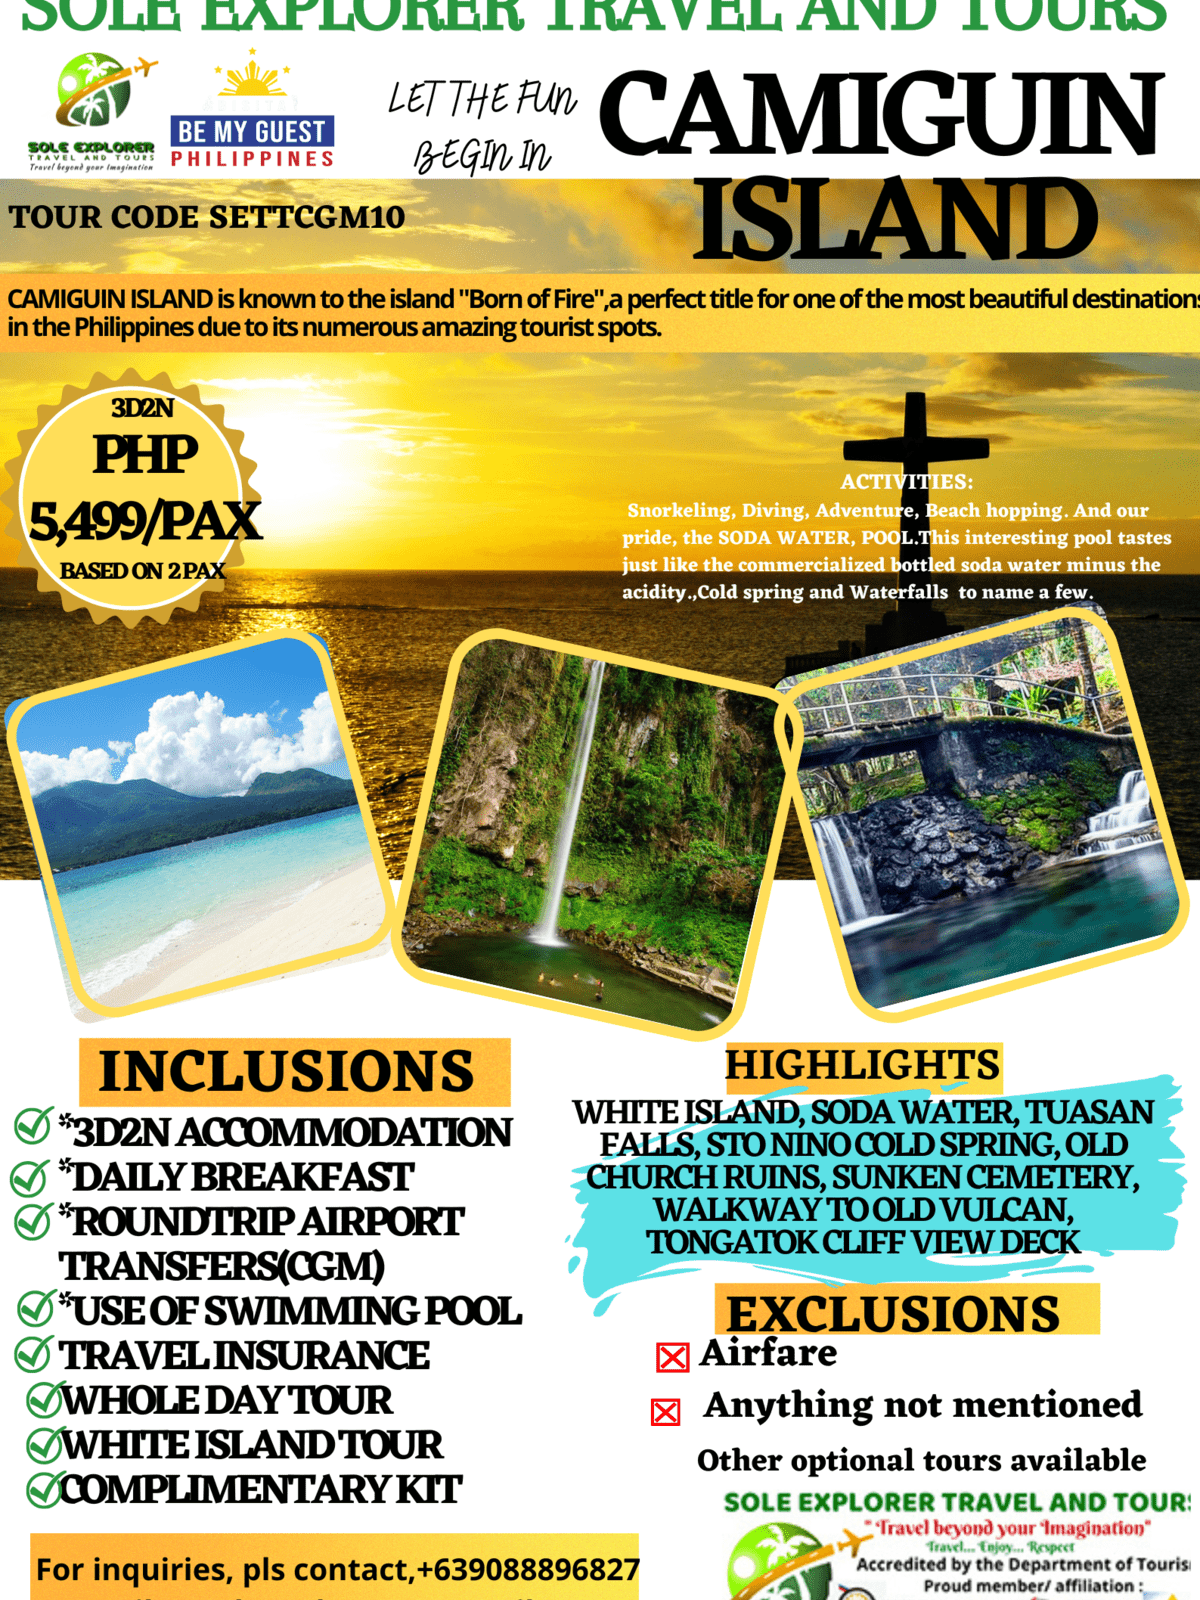 CAMIGUIN_Sole Explorer Travel and Tours